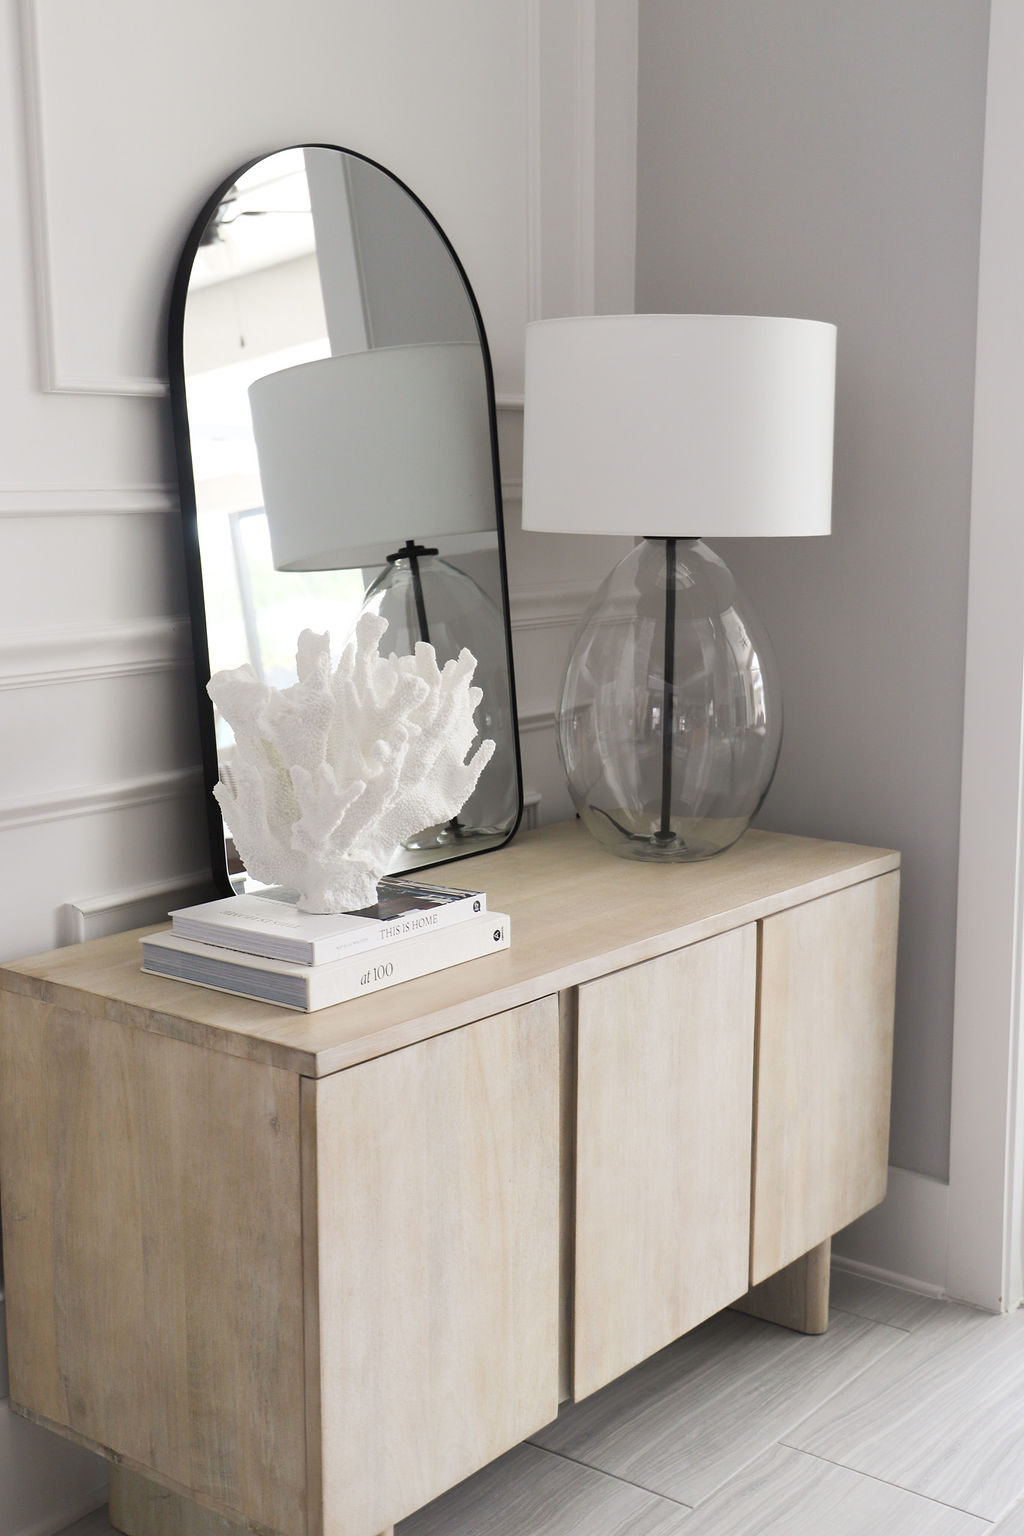 A light wood cabinet that features a mirror with a black rim, a glass lamp with white shade, a stack of books and a coral statue.